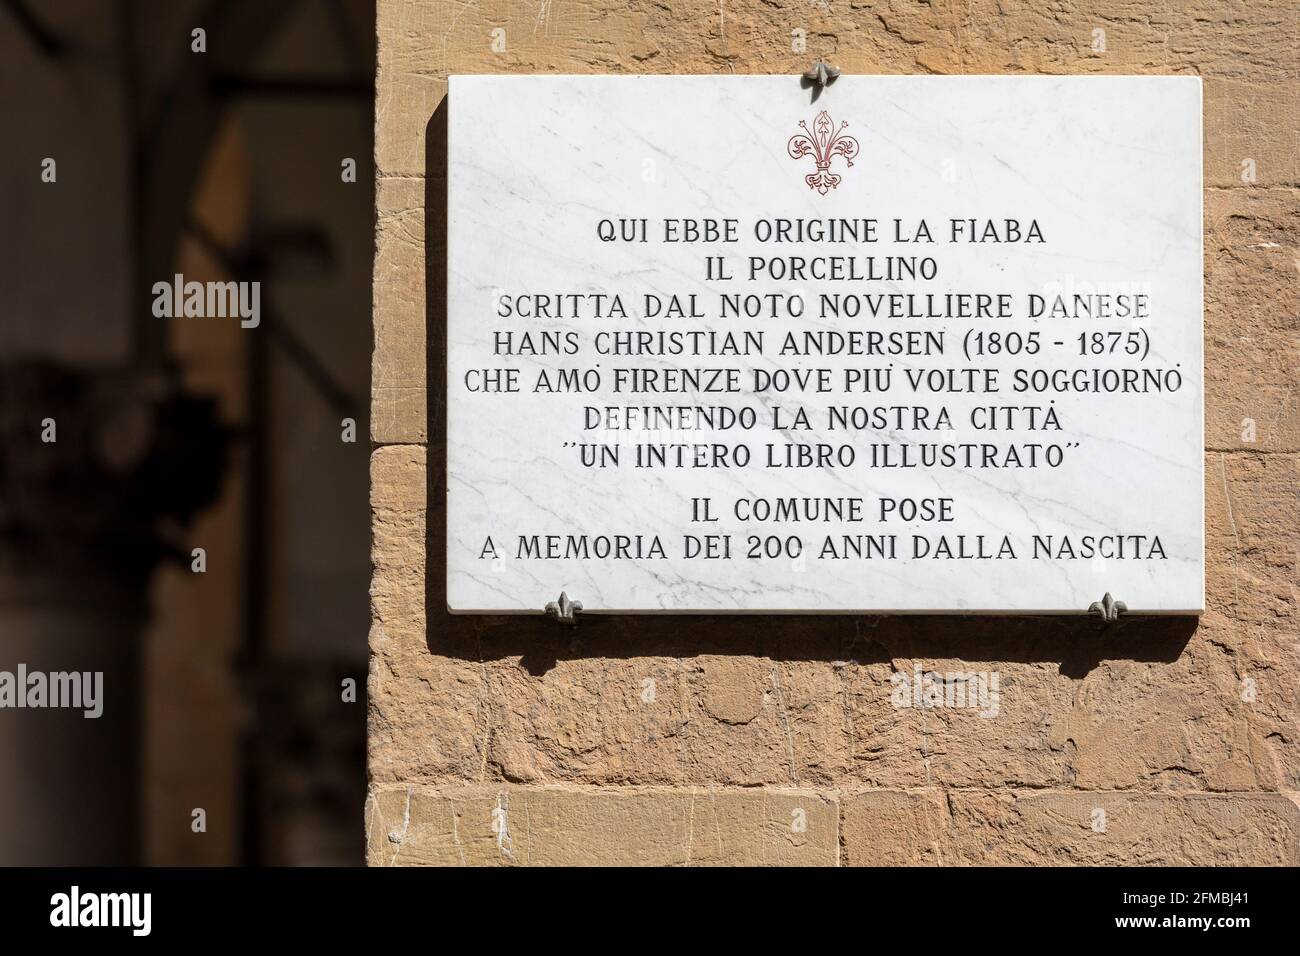 plaque commemorating the origin of the fairy tale 'Il Porcellino' by the Danish author Hans Christian Andersen, Loggia del Mercato Nuovo, leather street market in Florence, Tuscany, Italy Stock Photo